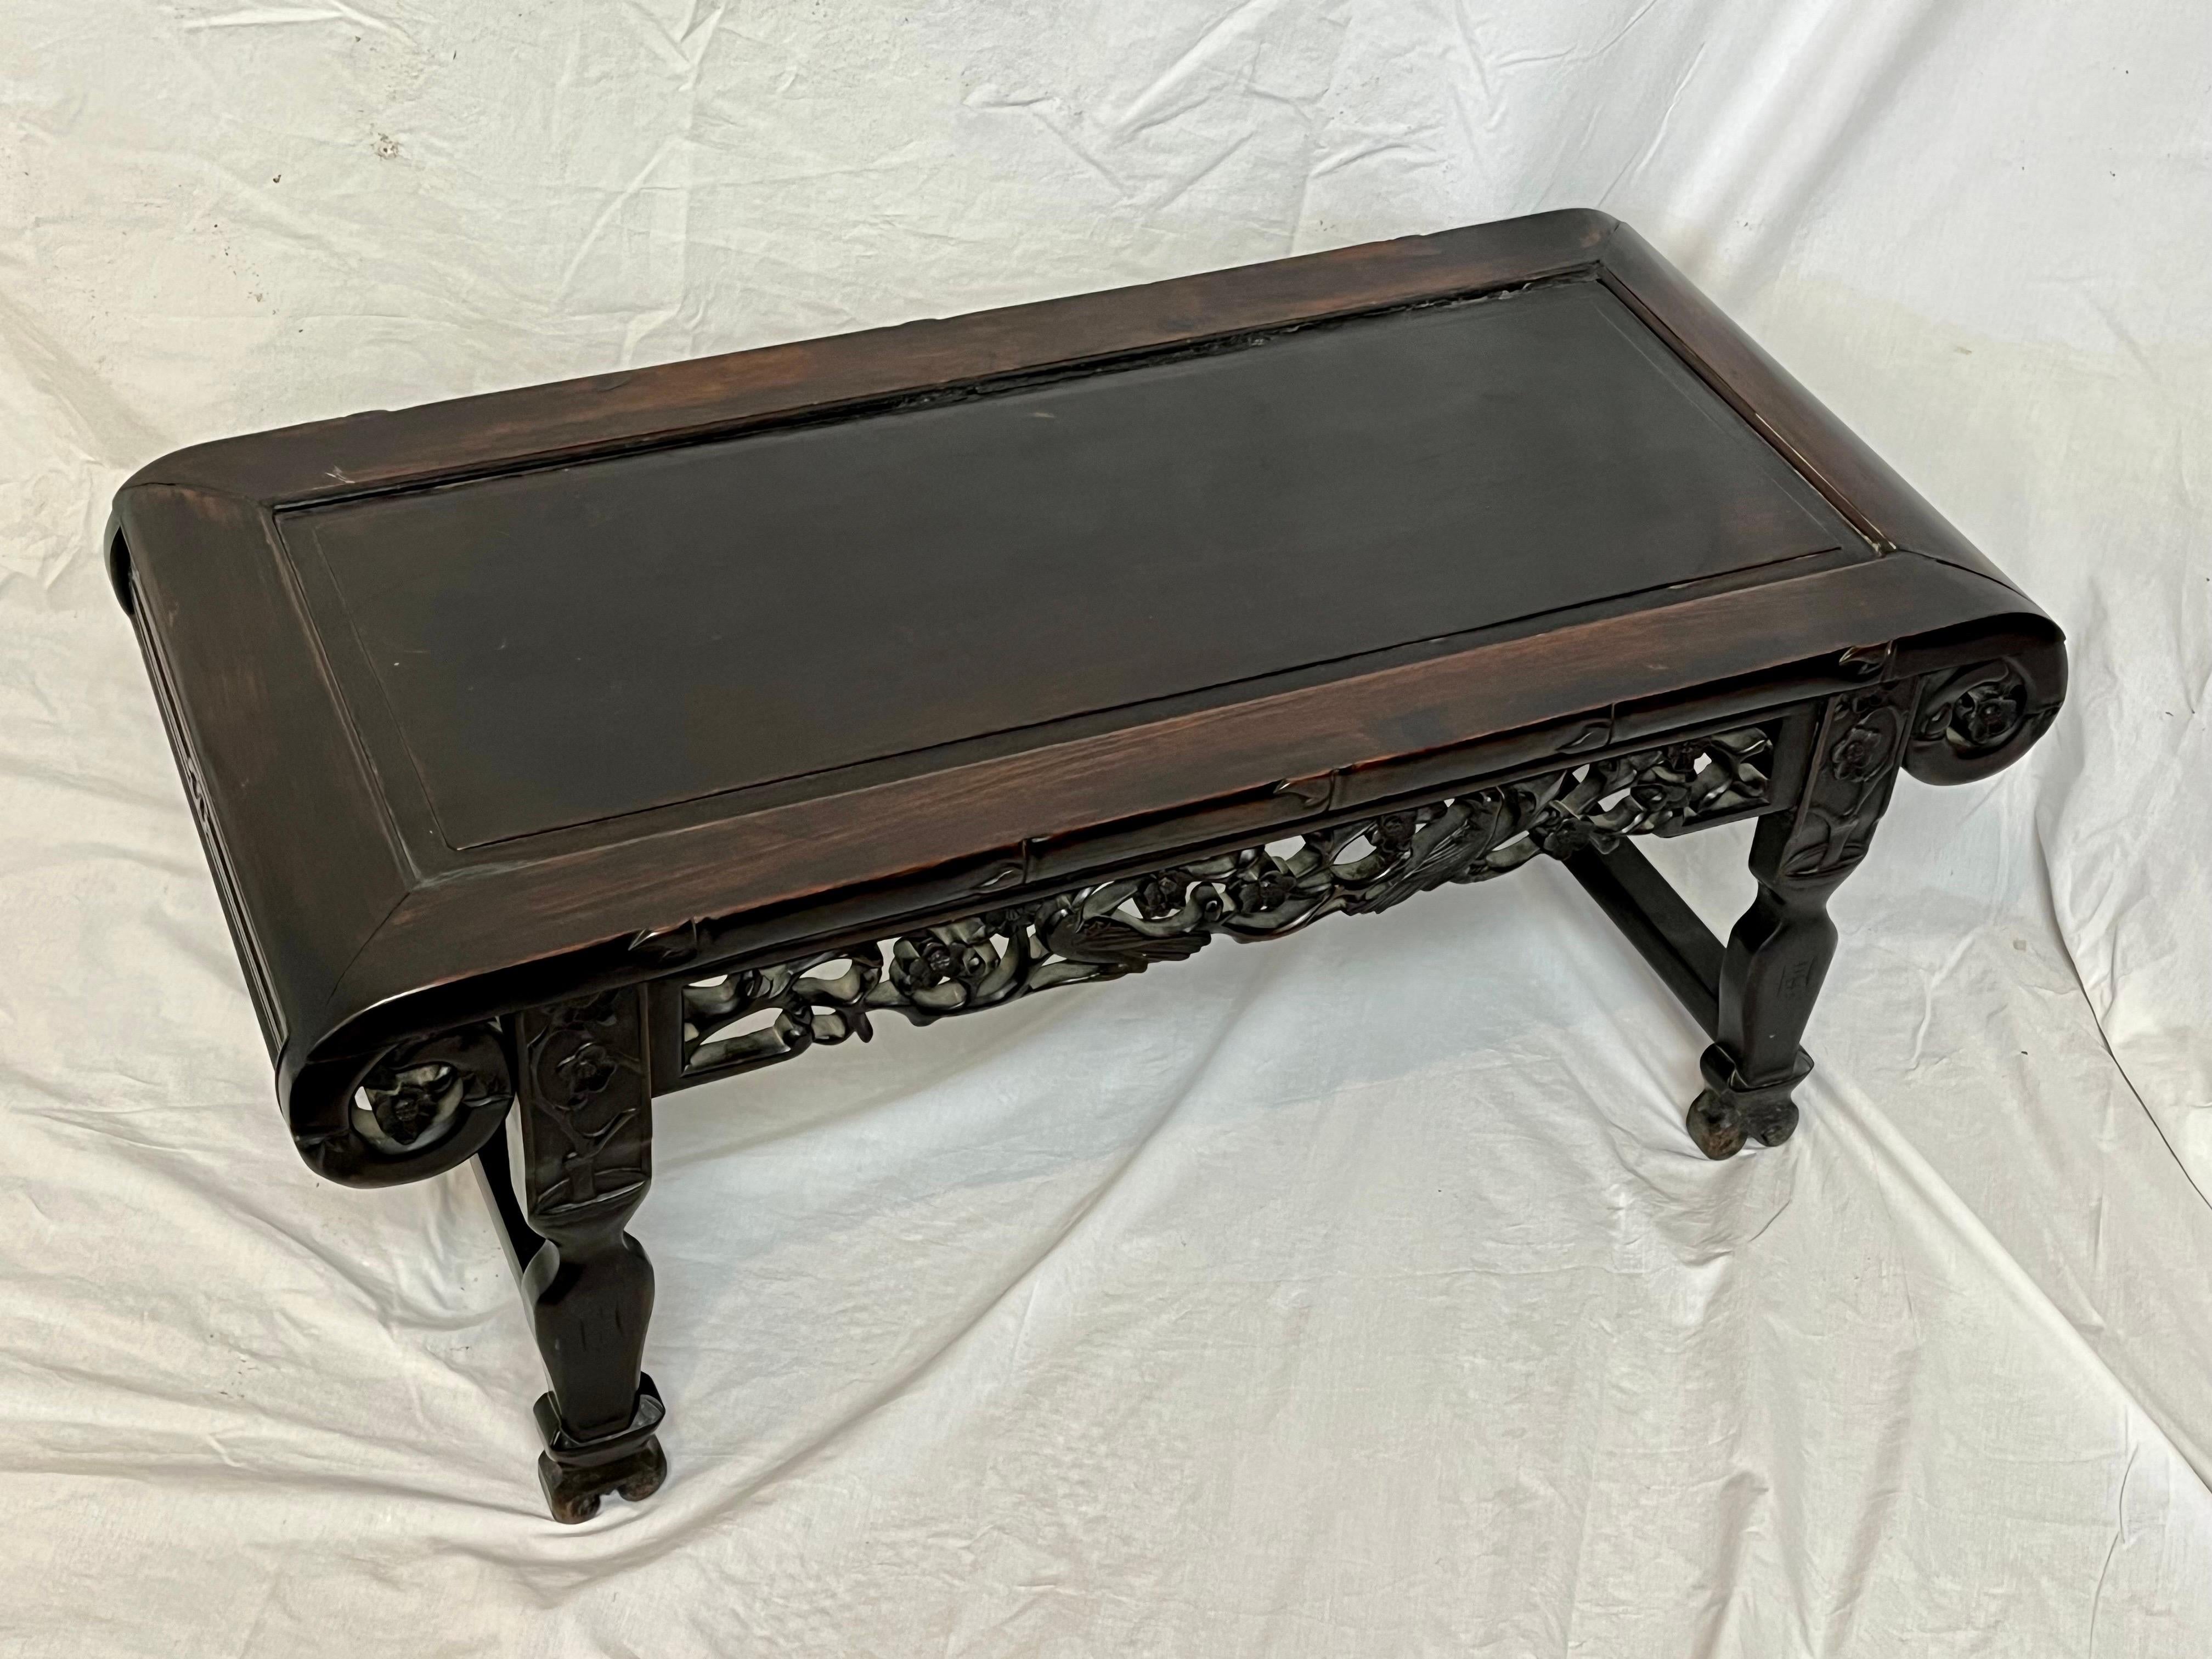 Chinoiserie Asian Antique Carved and Pierced Fretwork Rounded Corners Low or Coffee Table